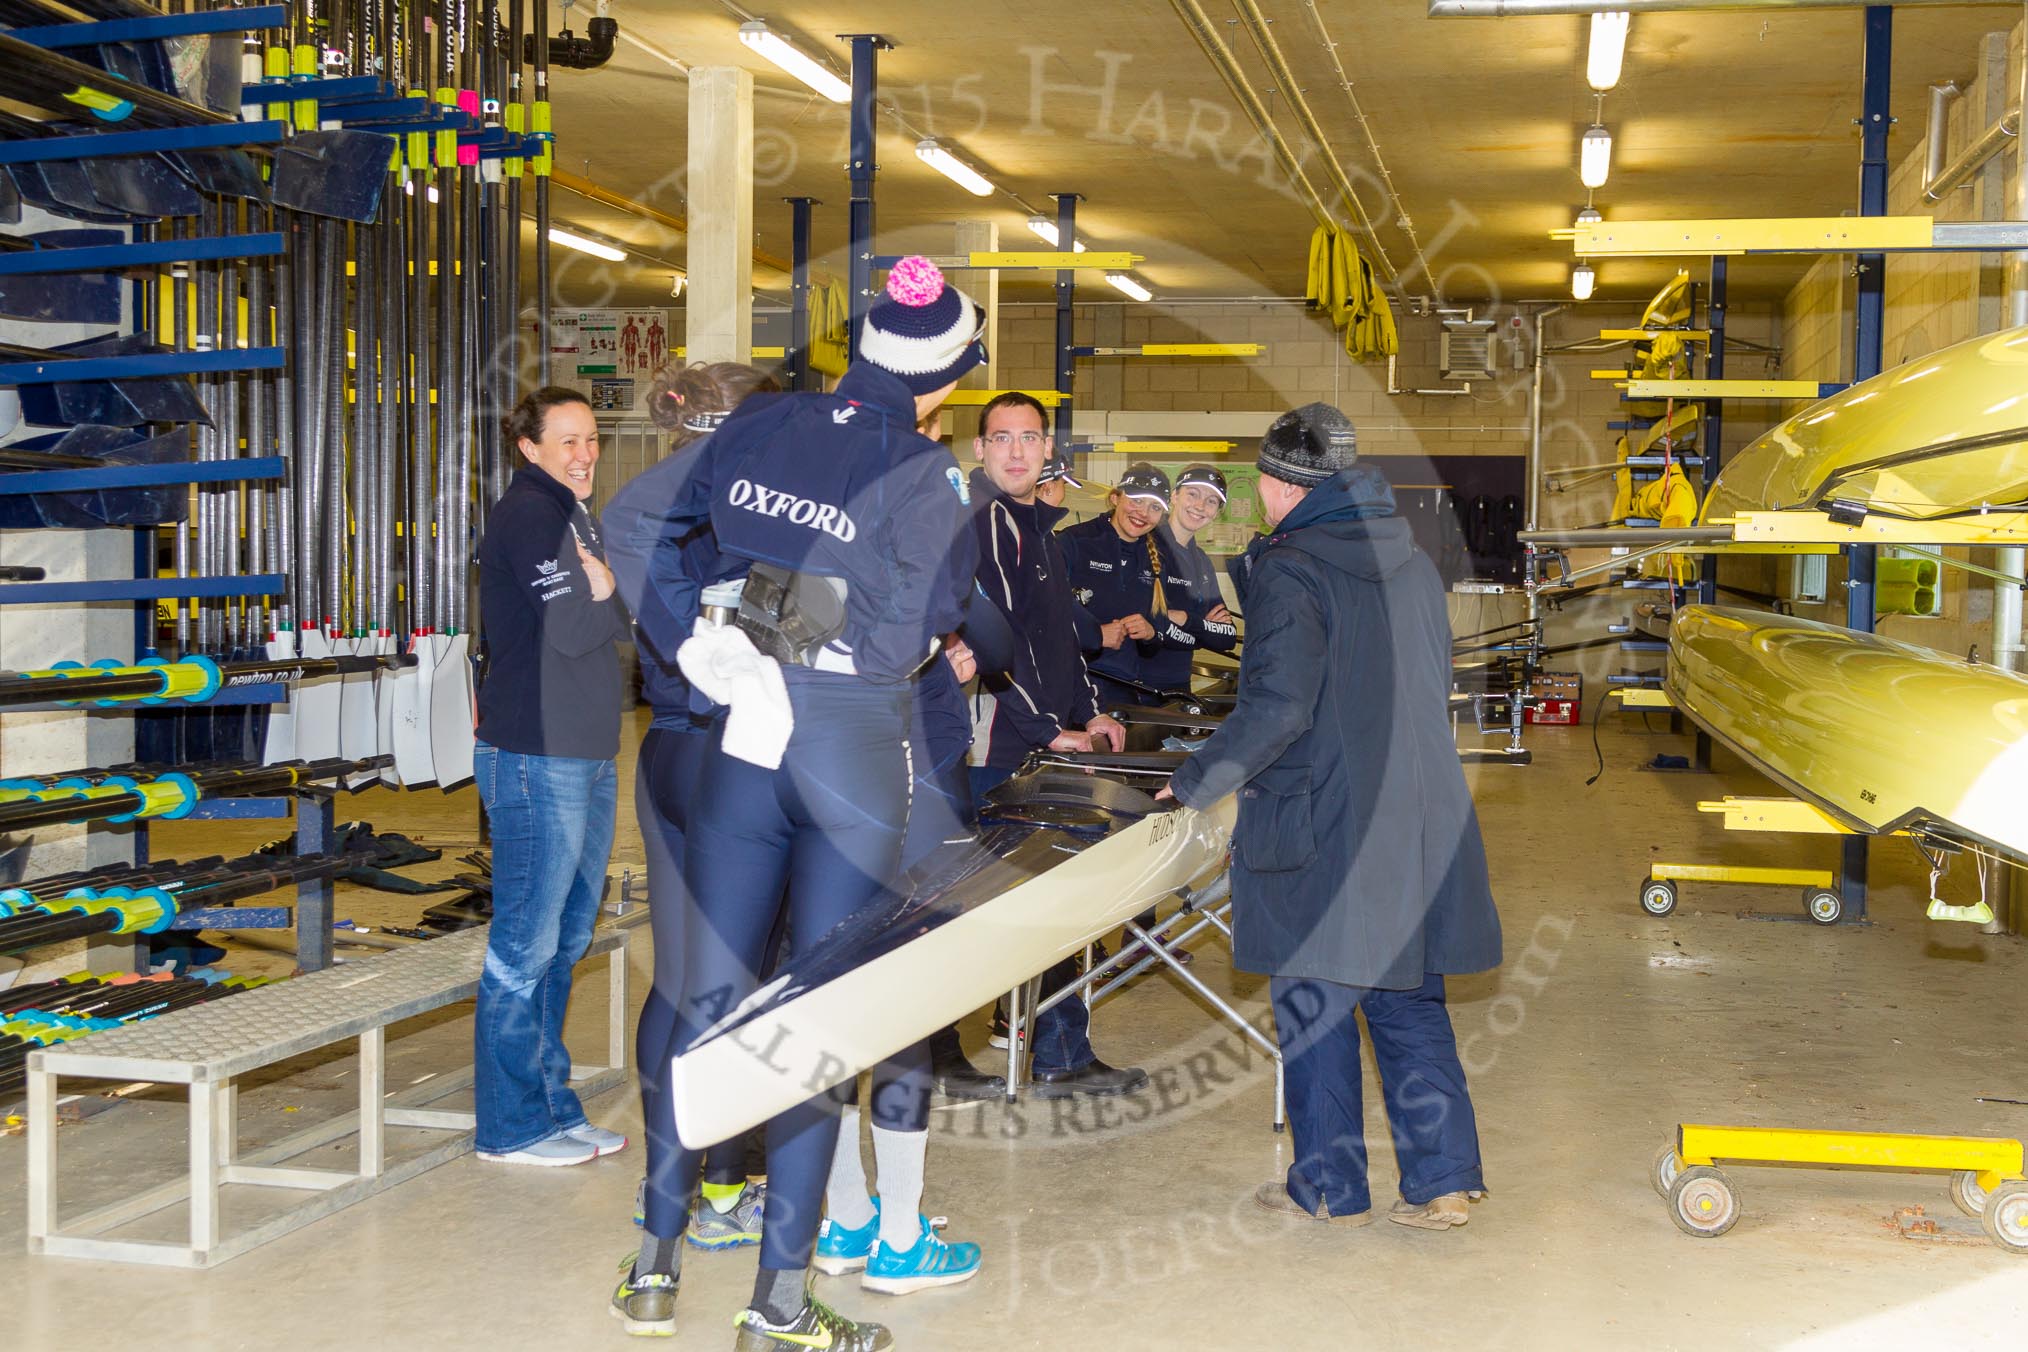 The Boat Race season 2015: OUWBC training Wallingford.

Wallingford,

United Kingdom,
on 04 March 2015 at 15:18, image #12